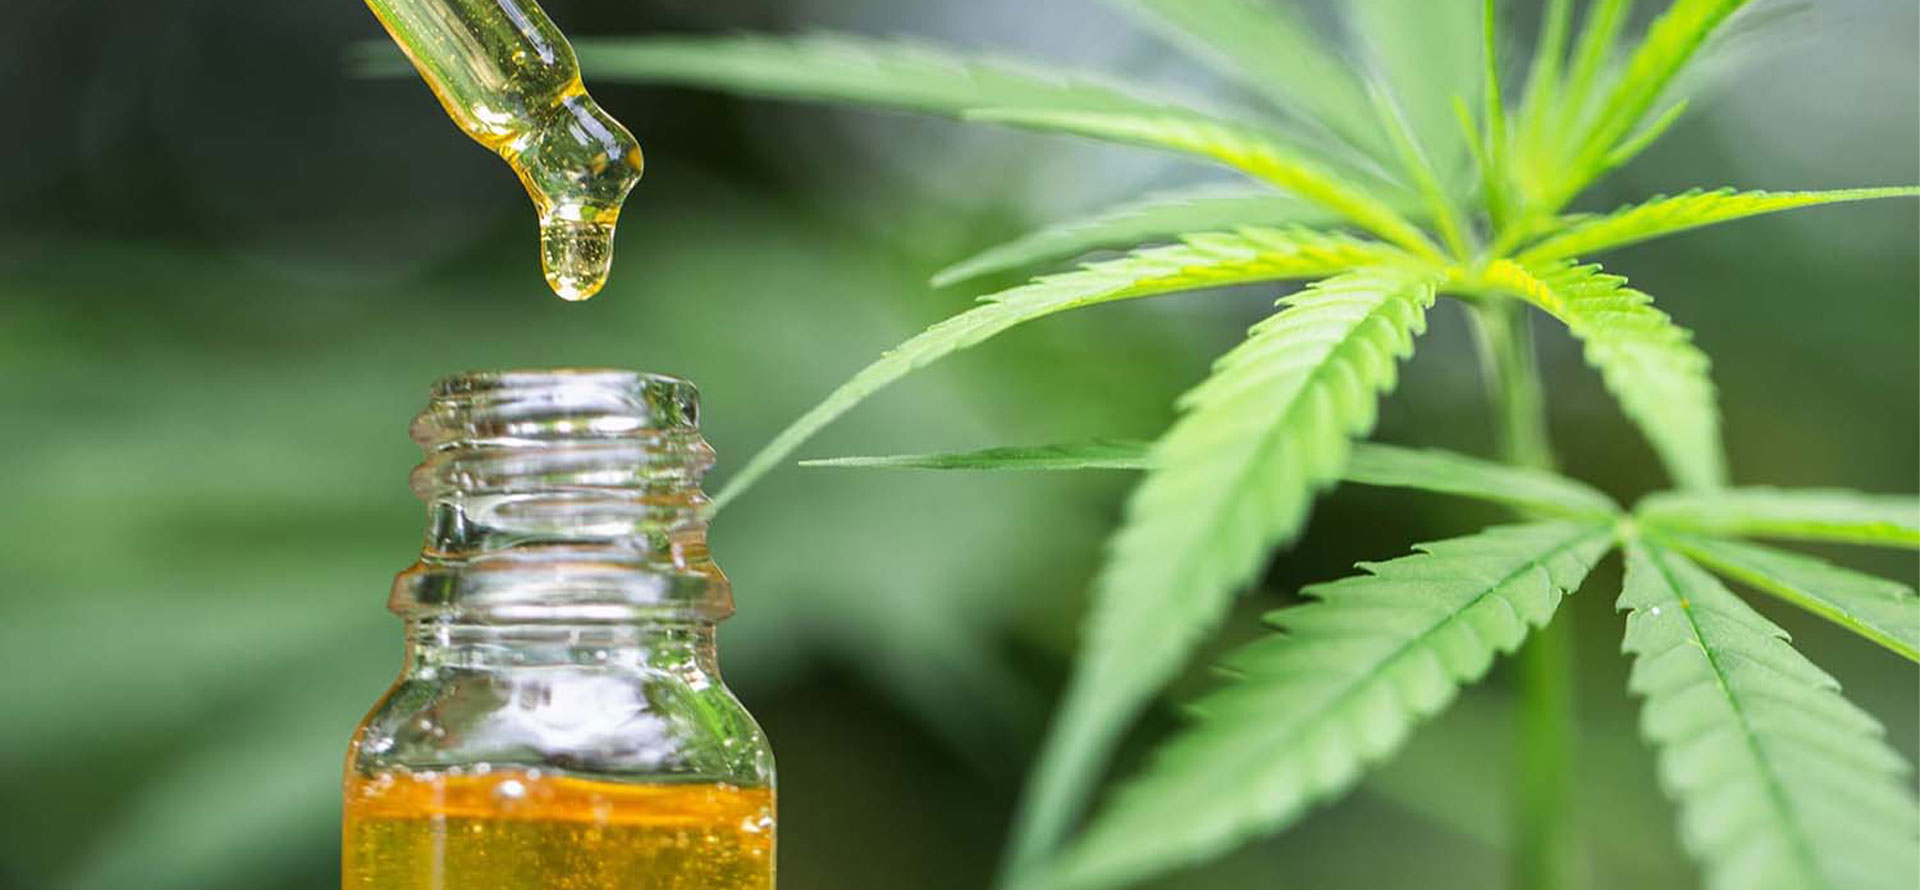 HOW OFTEN TO USE CBC OIL FROM DROPPER - Cbd|Oil|Benefits|Cbc|Effects|Pain|Study|Health|Thc|Products|Cannabinoids|Studies|Research|Anxiety|Cannabis|Symptoms|Evidence|People|System|Disease|Treatment|Inflammation|Hemp|Body|Receptors|Disorders|Brain|Plant|Cells|Side|Effect|Blood|Patients|Cancer|Product|Skin|Marijuana|Properties|Cannabidiol|Cannabinoid|Cbd Oil|Cbd Products|Cbc Oil|Side Effects|Endocannabinoid System|Chronic Pain|Multiple Sclerosis|Pain Relief|Cannabis Plant|Cbd Oil Benefits|Blood Pressure|Health Benefits|High Blood Pressure|Anti-Inflammatory Properties|Neuropathic Pain|Animal Studies|Hemp Plant|Hemp Oil|Anxiety Disorders|Cbd Product|Immune System|Clinical Trials|Cbd Gummies|Nerve Cells|Nervous System|Entourage Effect|Hemp Seed Oil|United States|Cbd Oils|Drug Administration